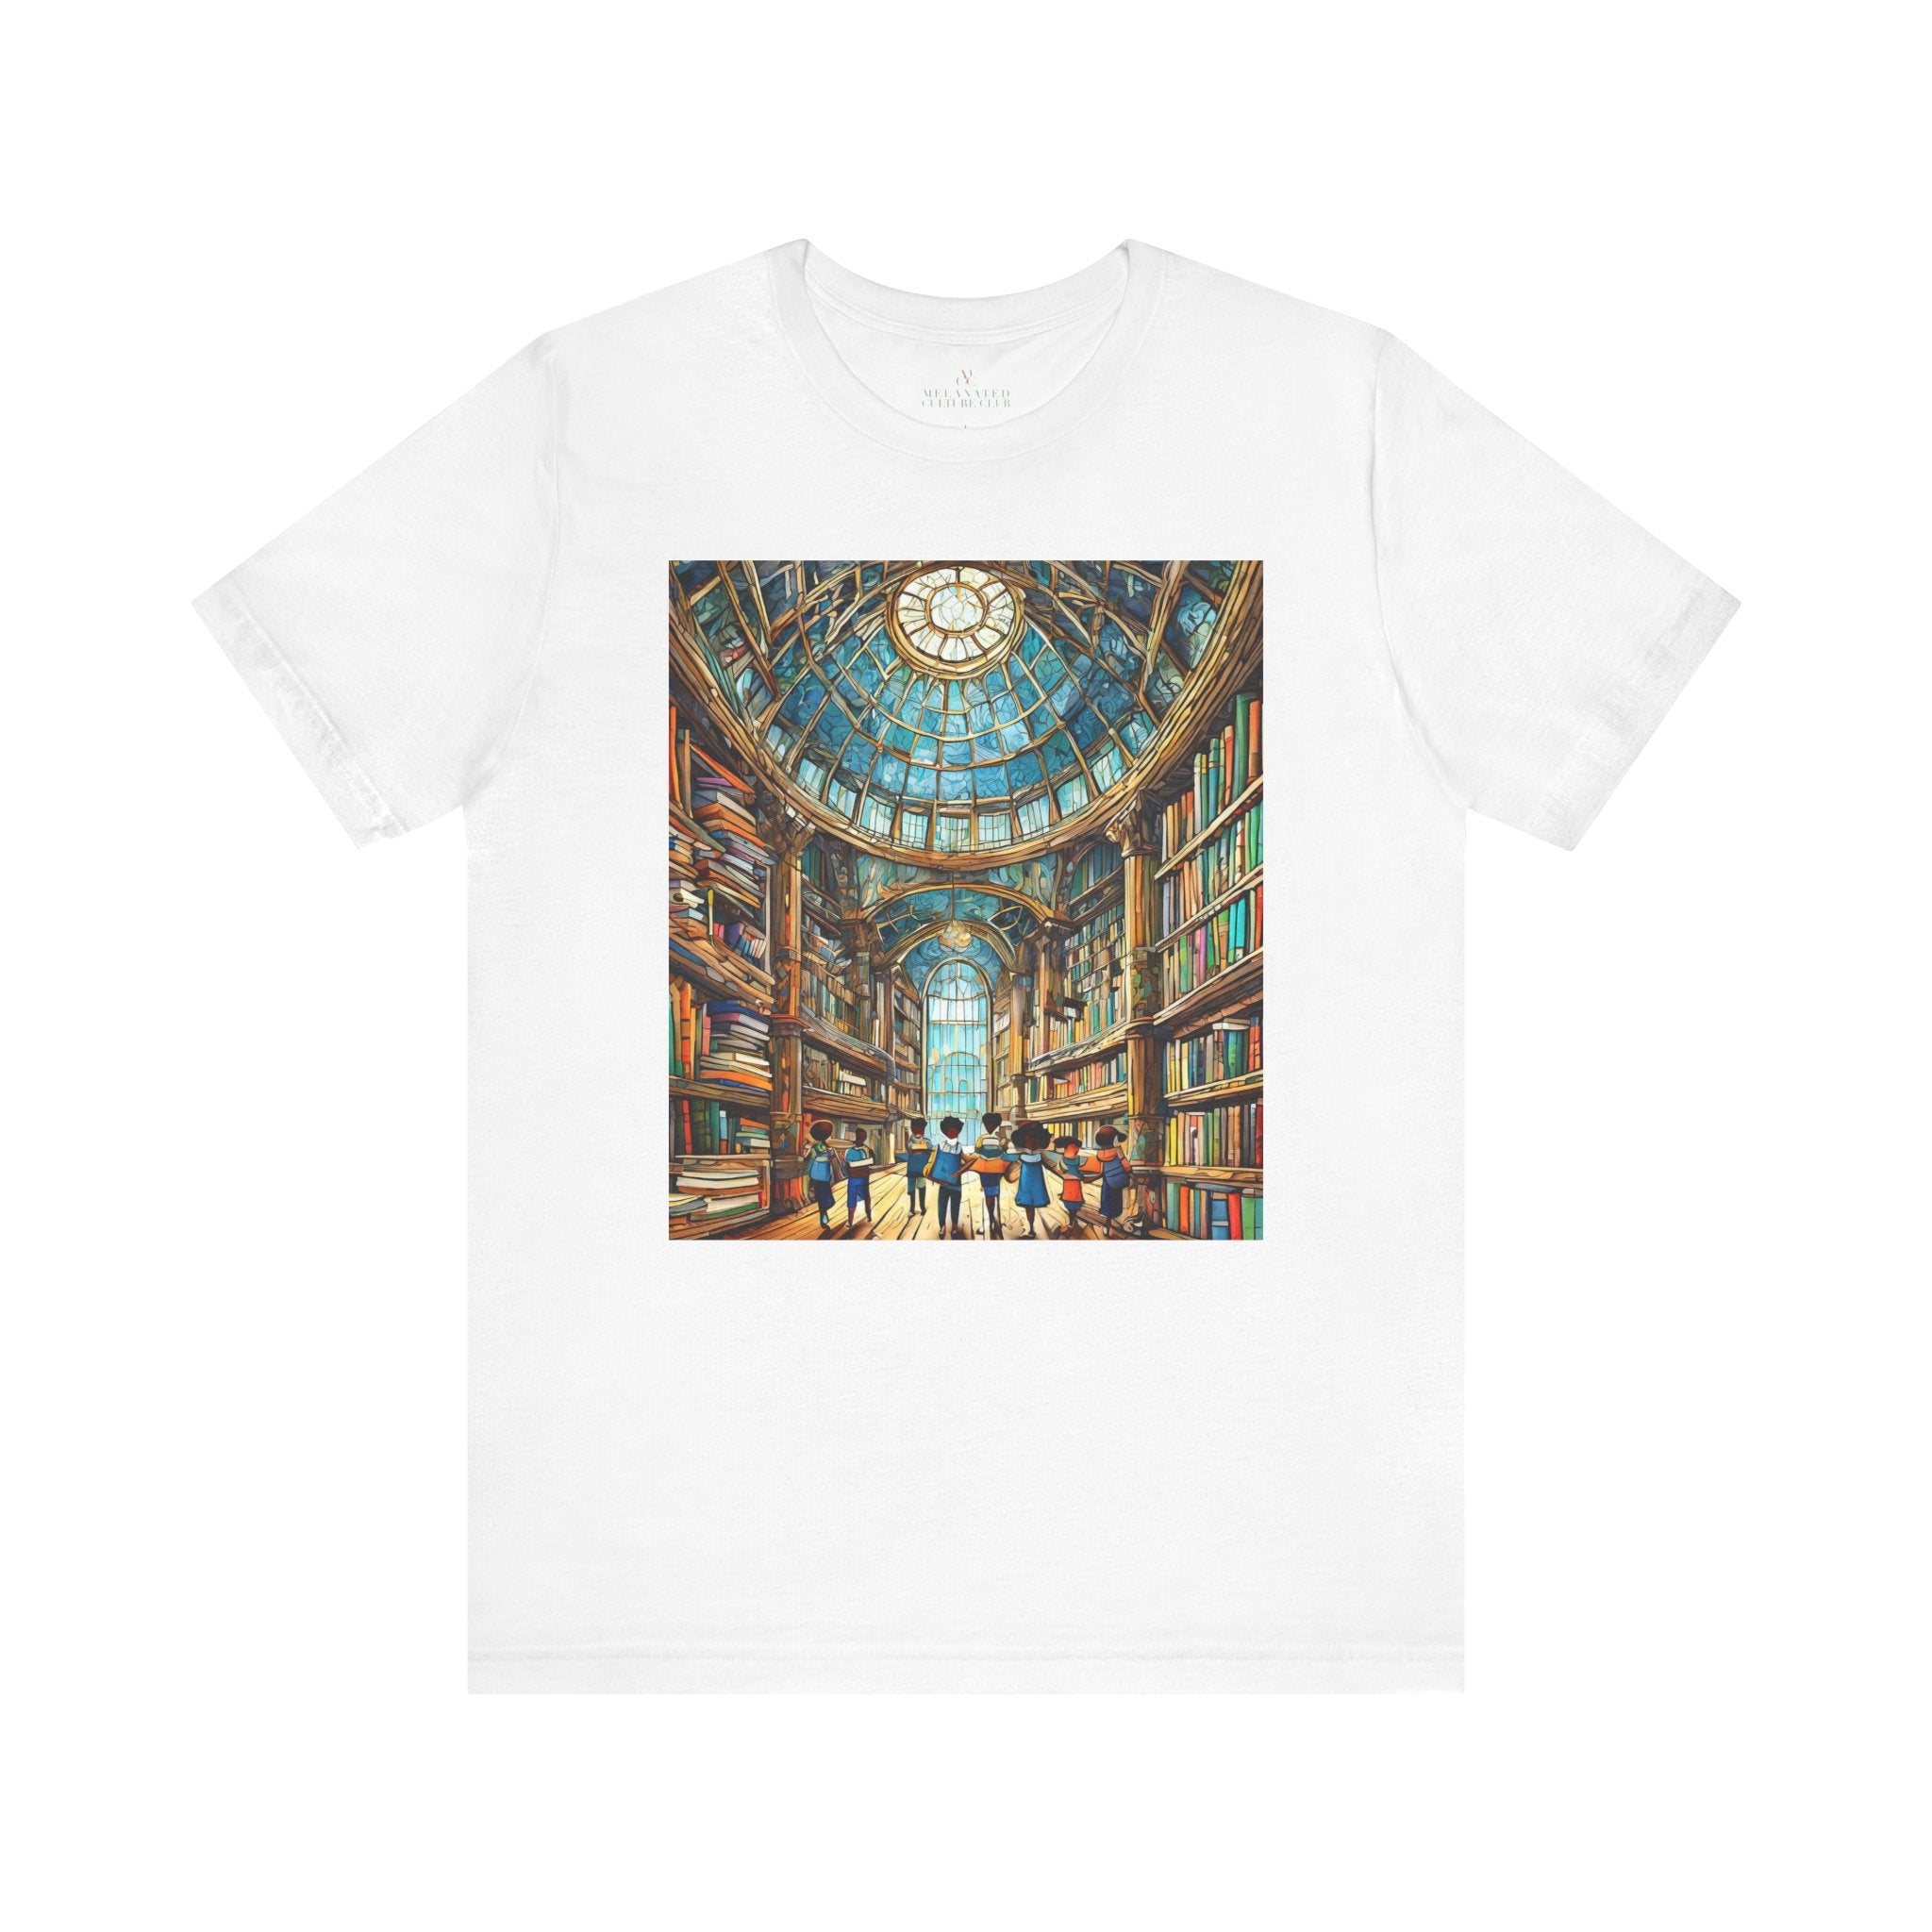 African American Kids at Library Tee shirt in white.